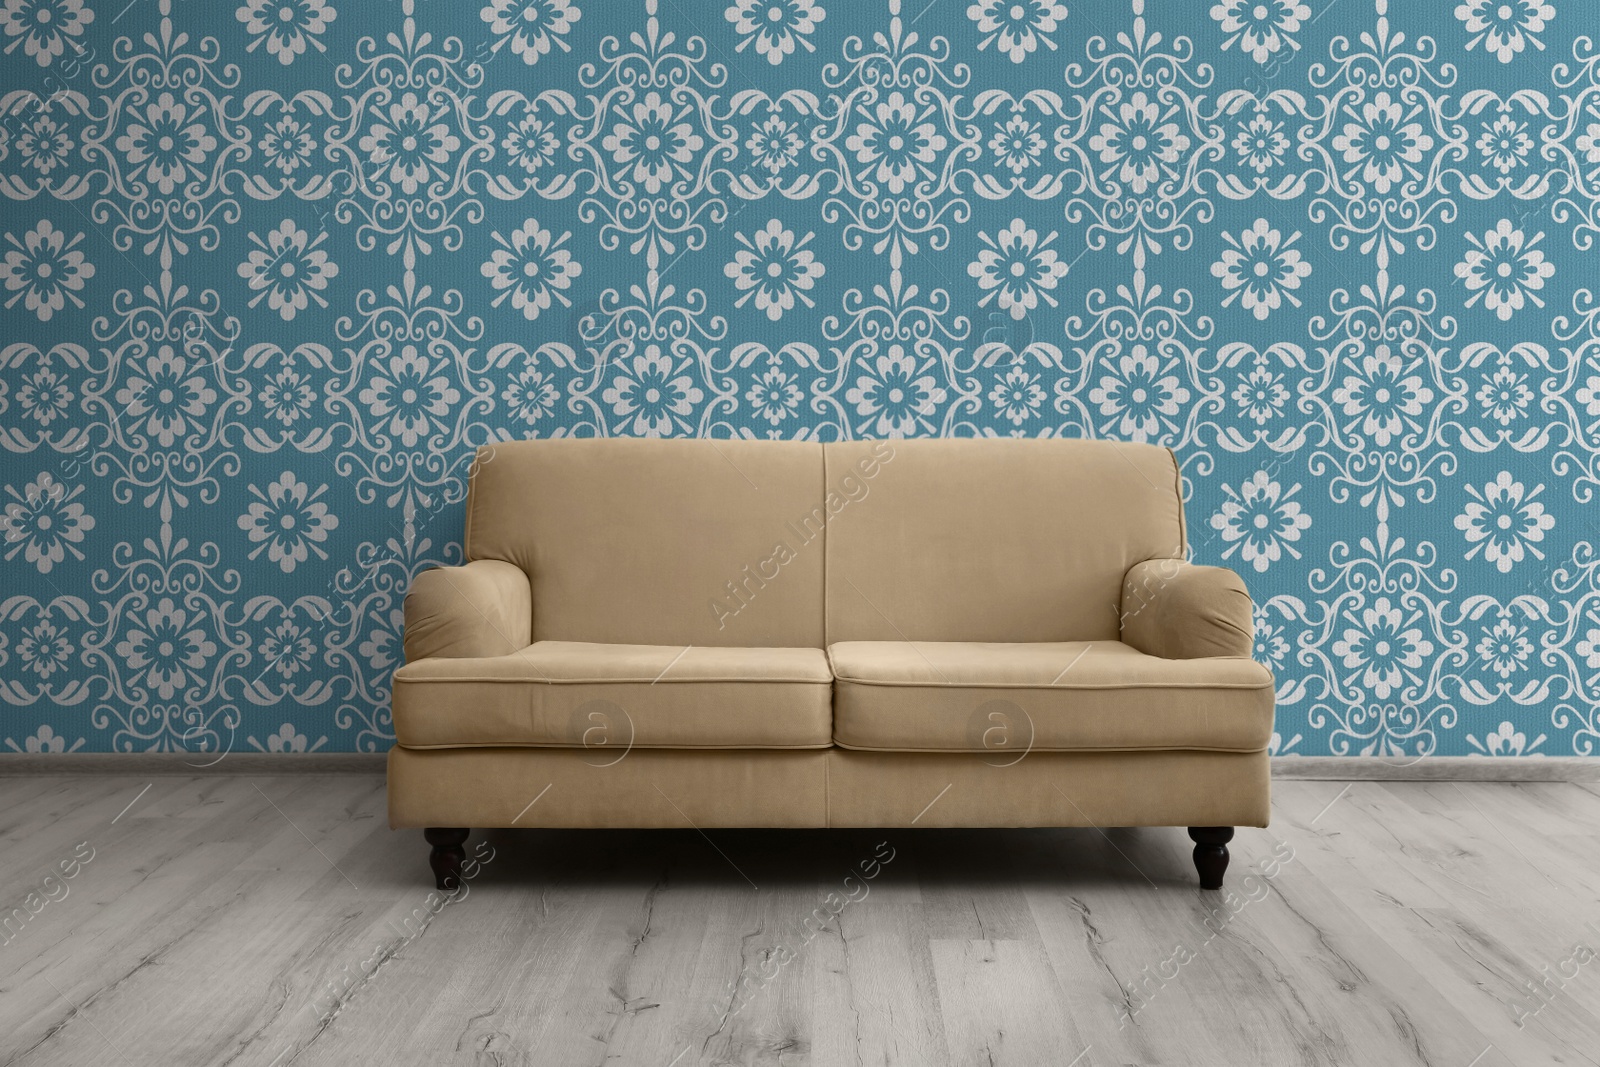 Image of Modern sofa near patterned wallpapers. Interior design 